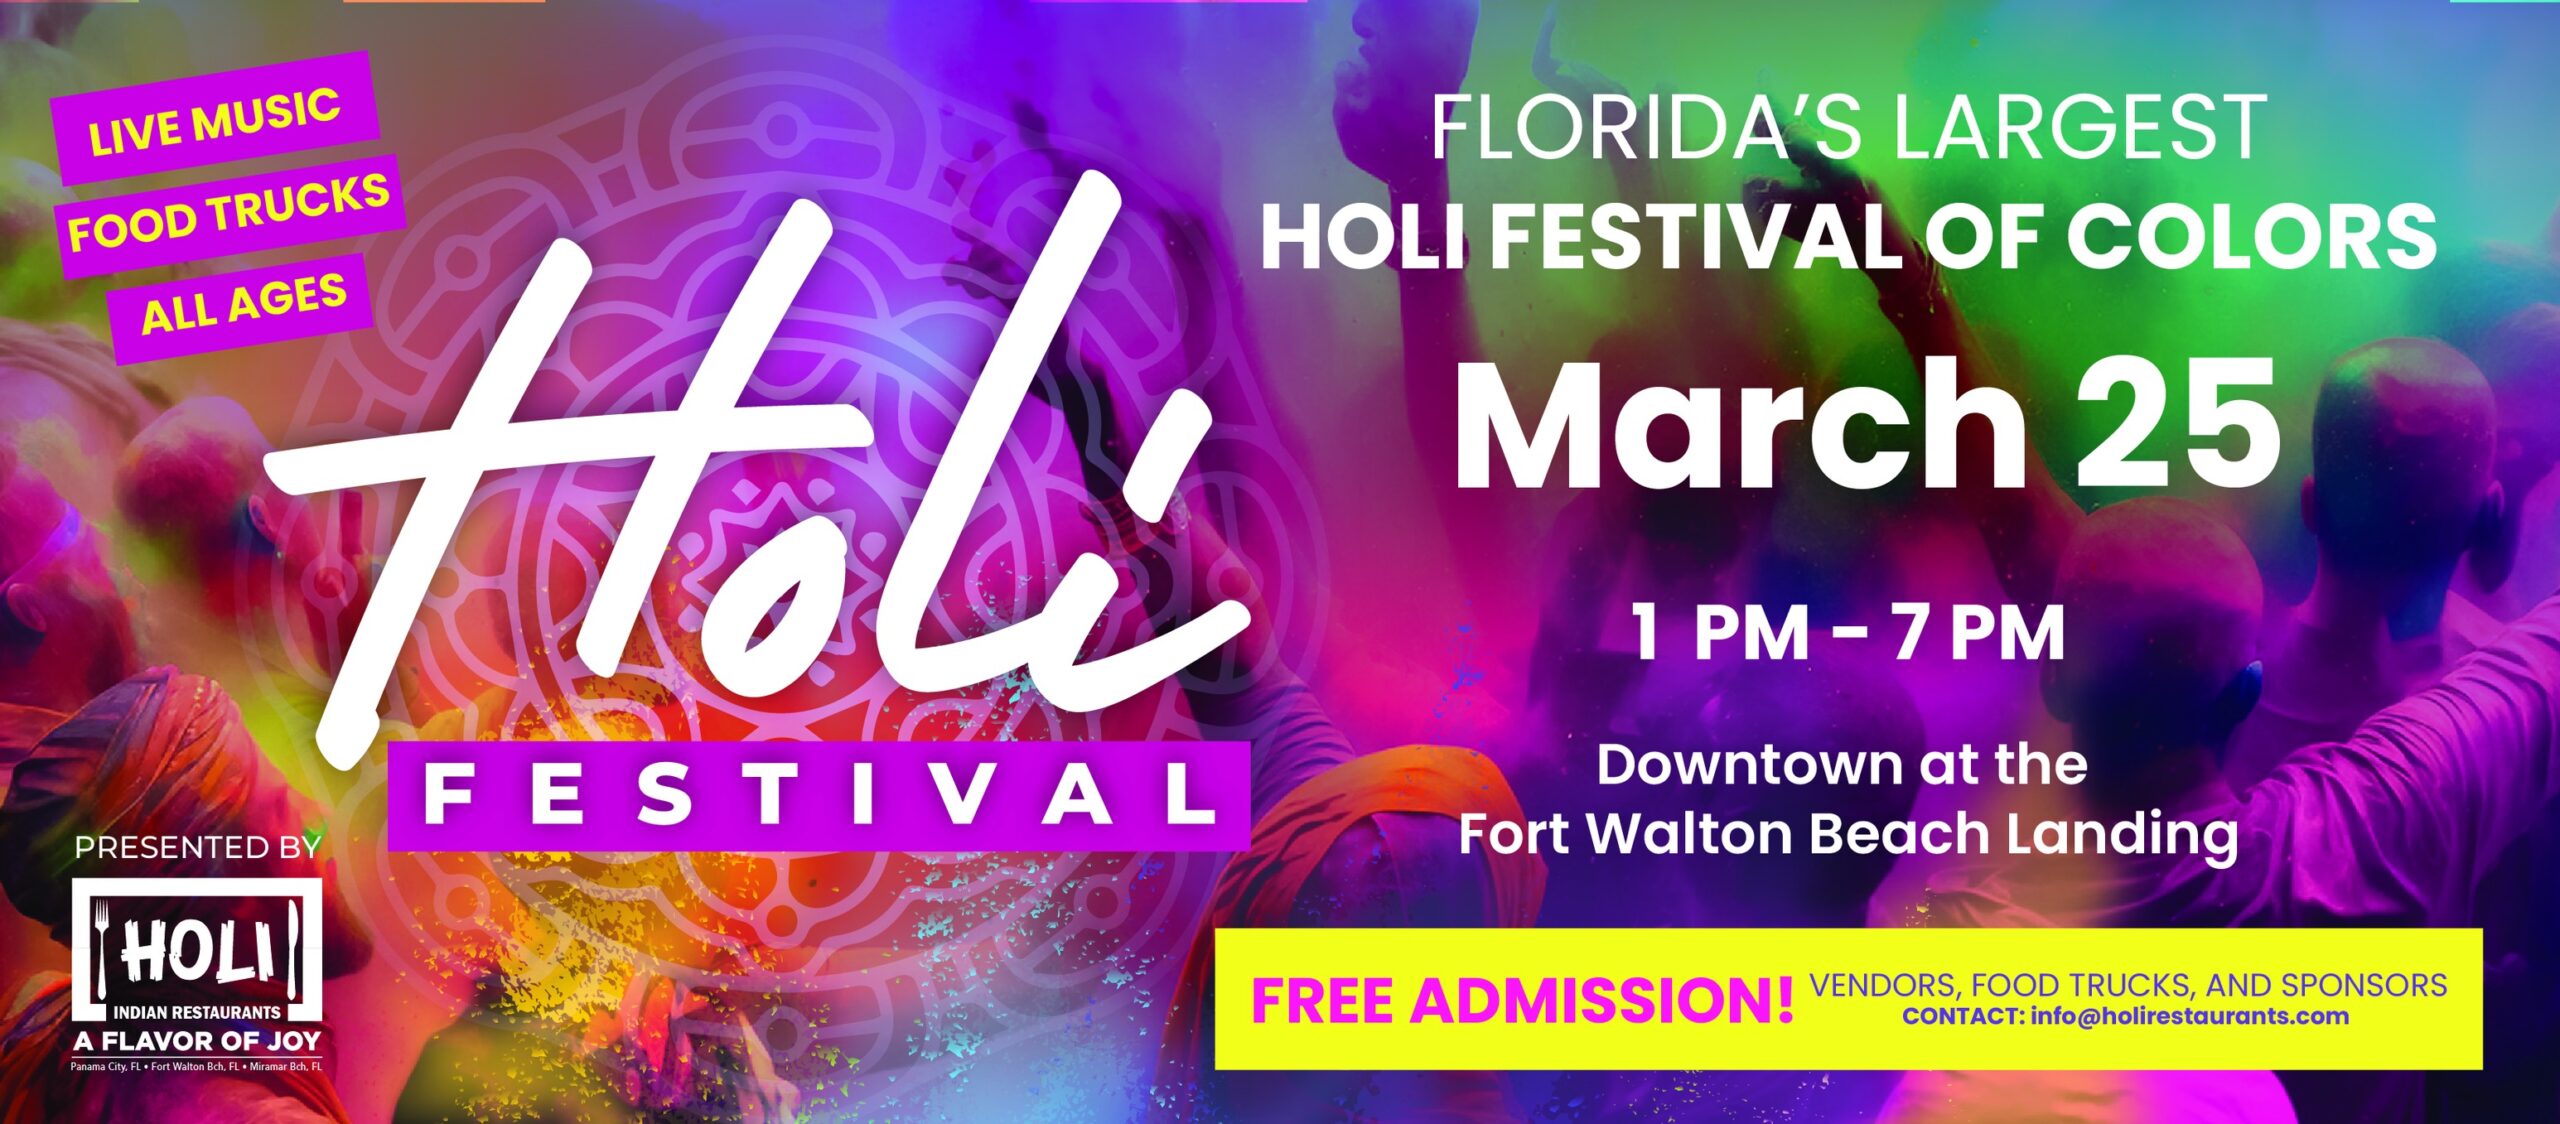 Holi Festival of Colors March 25th